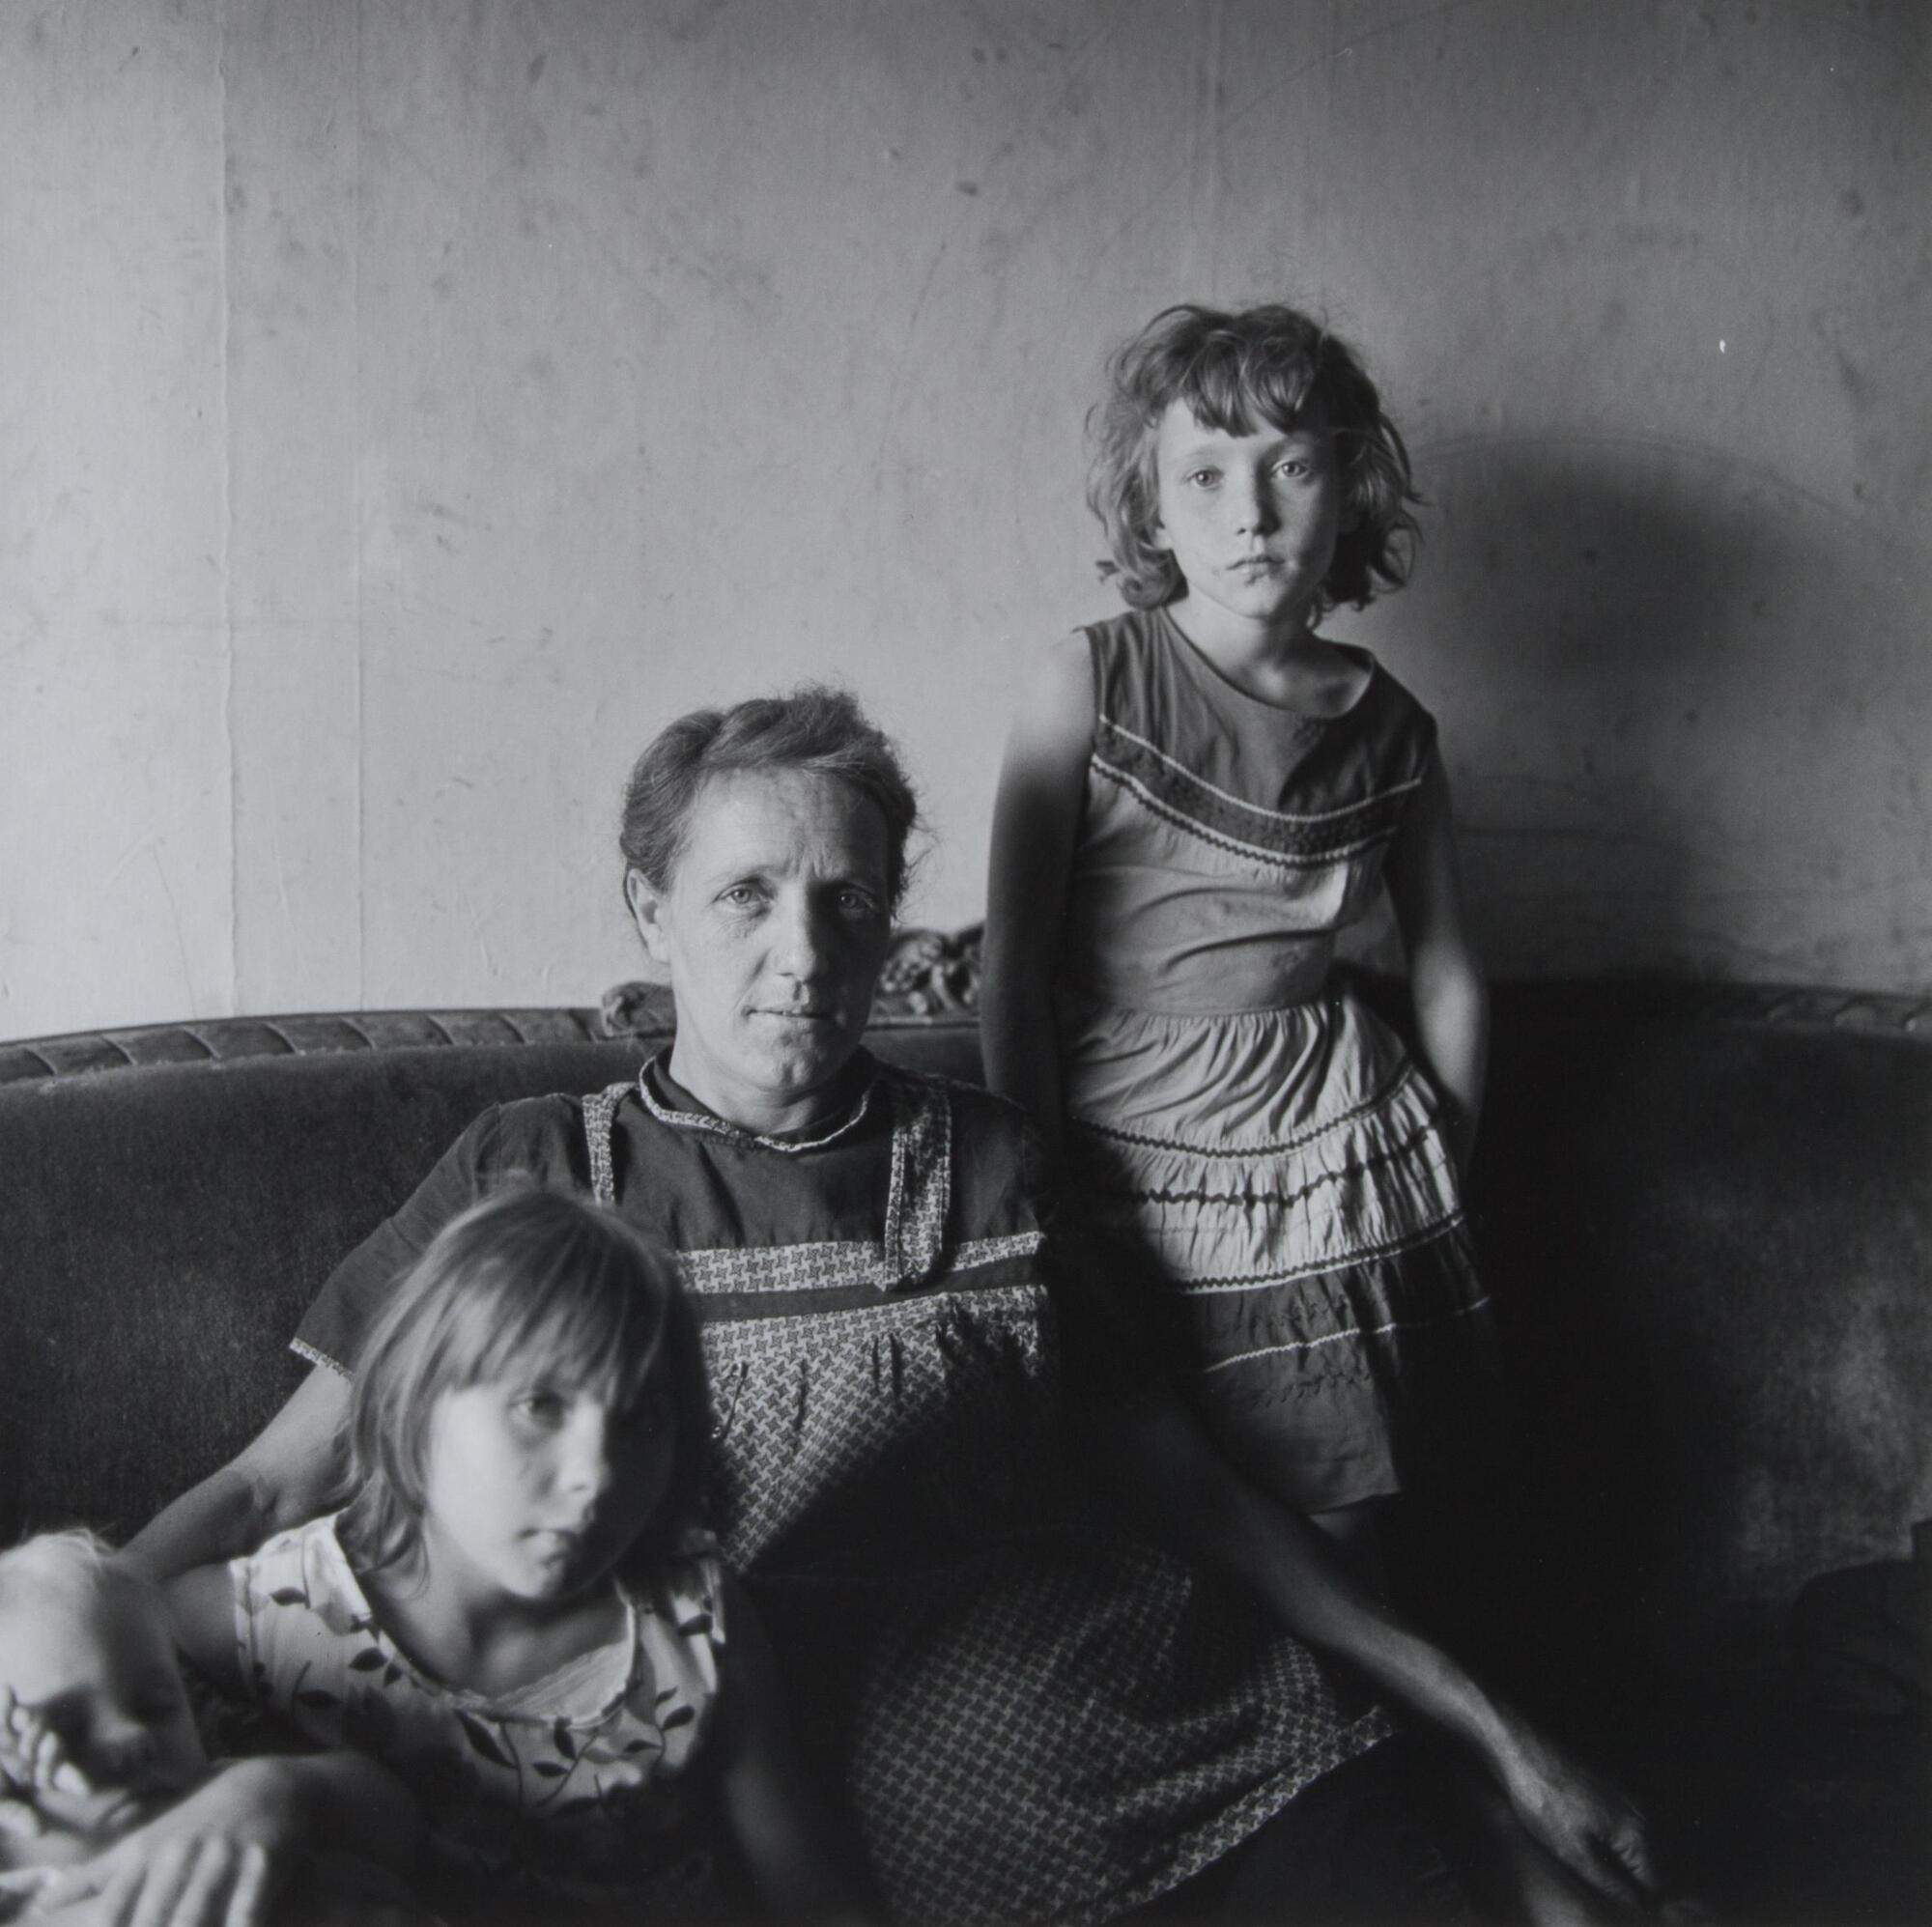 Portrait of a woman, her two daughters and a young baby. They sit on a sofa indoors; one daughter slouches into the couch on the left, holding the baby. The mother sits in the center, and the other daughter stands on the sofa cushion to the right of her mother.